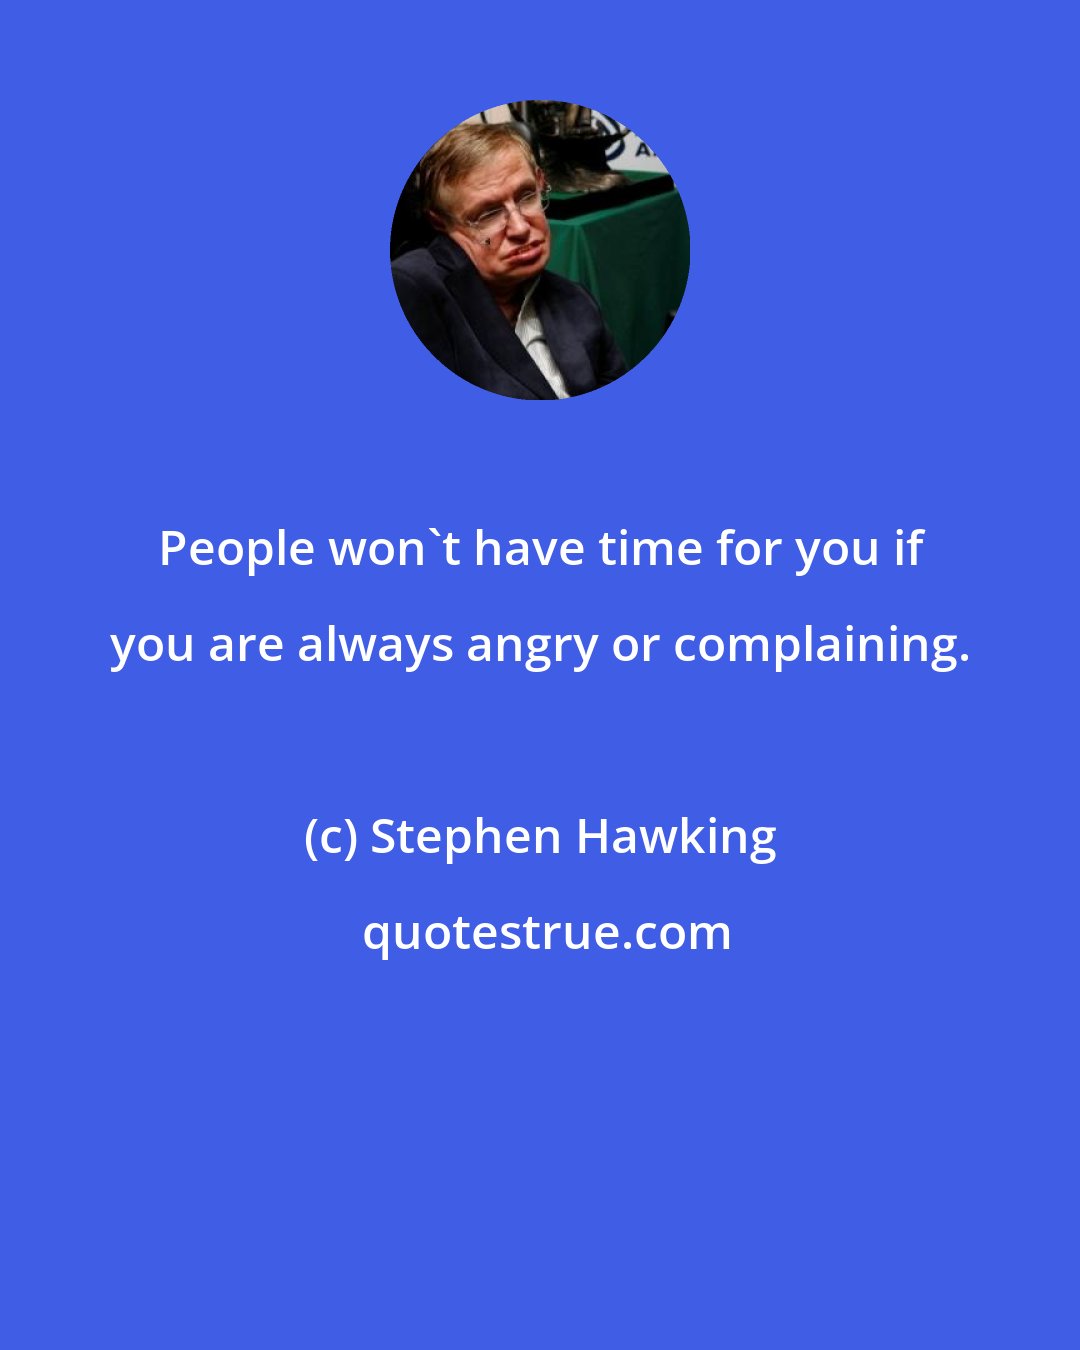 Stephen Hawking: People won't have time for you if you are always angry or complaining.